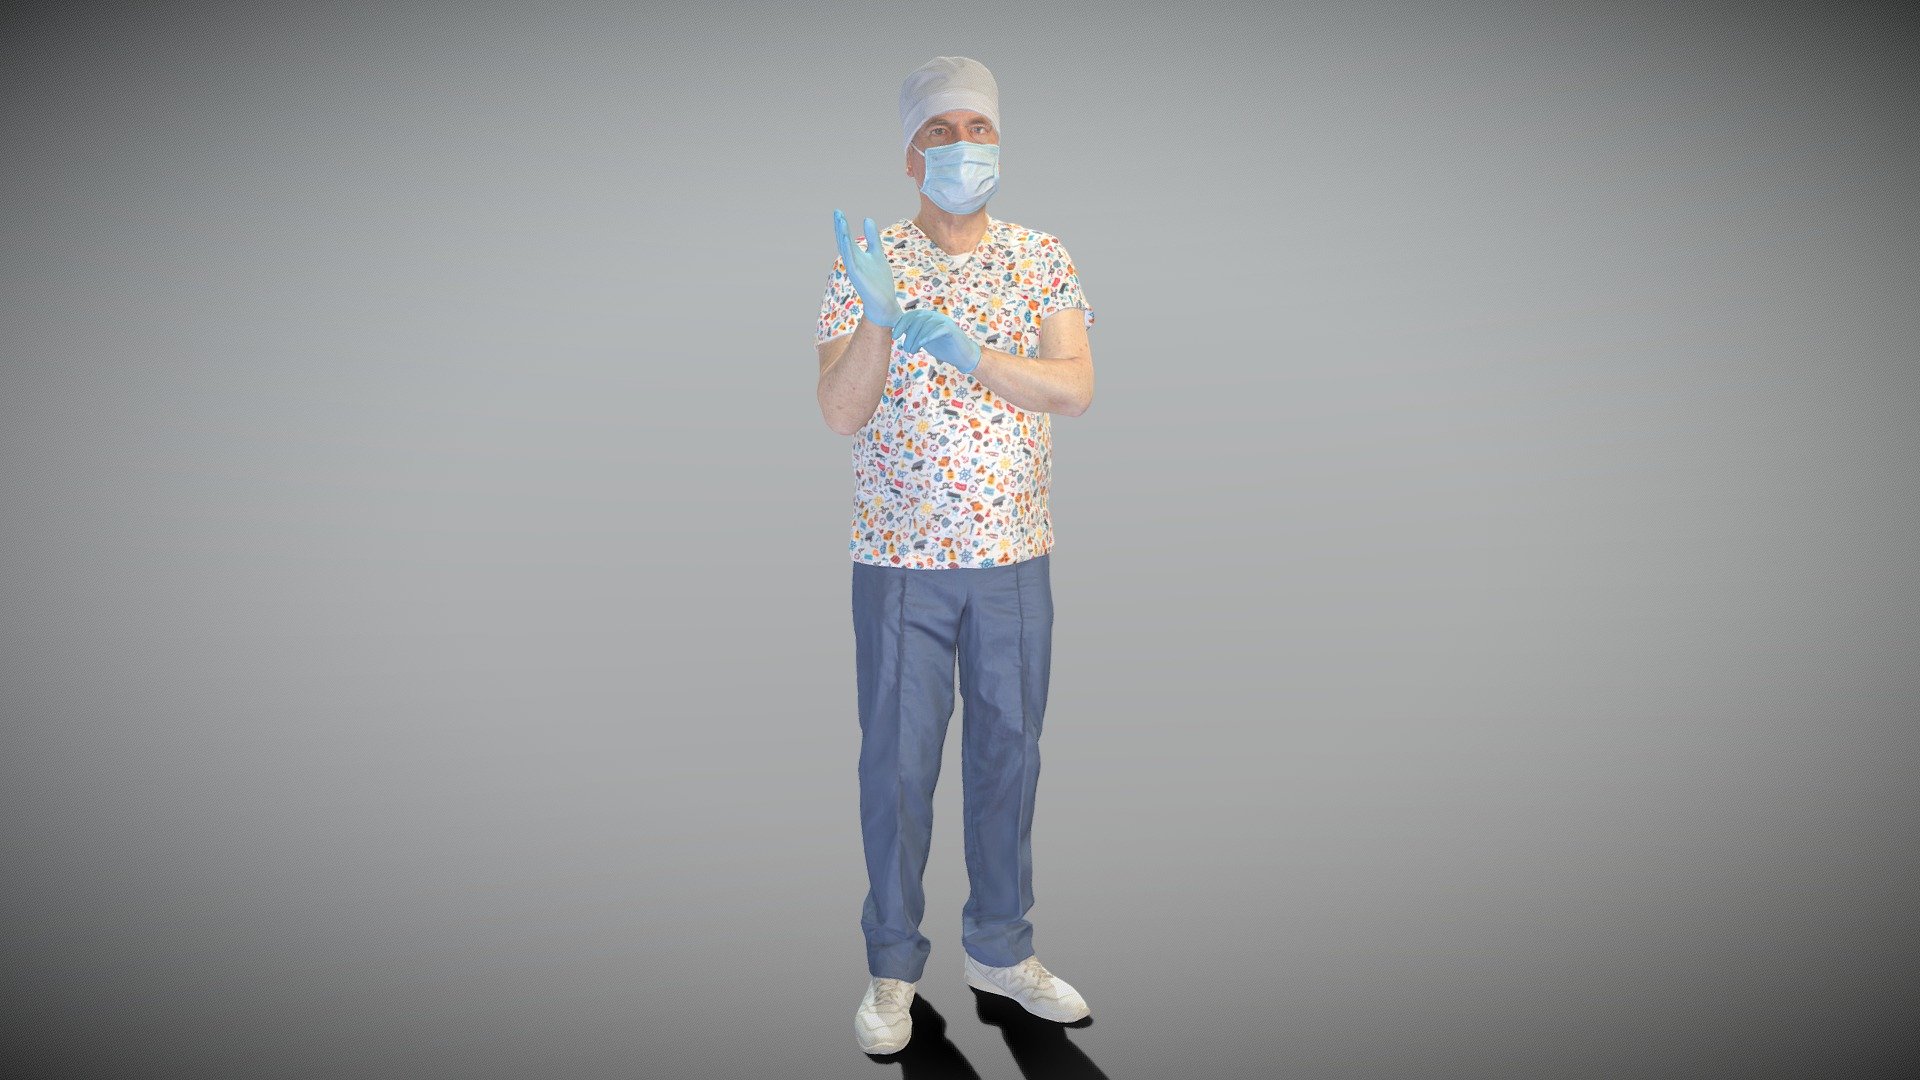 This is a true human size and detailed model of an adult man of Caucasian appearance dressed in a surgical uniform. The model is captured in casual pose to be perfectly matching to variety of architectural visualization, background character, product visualization, e.g. advert banners, professional products/devices presentations, VR/AR content etc.

Technical characteristics:




digital double 3d scan model

decimated model (100k triangles)

sufficiently clean

PBR textures: Diffuse, Normal, Specular maps

non-overlapping UV map

Download package includes Cinema 4D project file with Redshift shader, OBJ, FBX files, which are applicable for 3ds Max, Maya, Unreal Engine, Unity, Blender, etc. All the textures you will find in the Tex folder, included into the main archive.

You may find some of our 3d models in free access on SketchFab https://sketchfab.com/deep3dstudio/collections/sample-basic-3d-models

New 3d models every day - Doctor putting on surgical gloves 335 - Buy Royalty Free 3D model by deep3dstudio 3d model